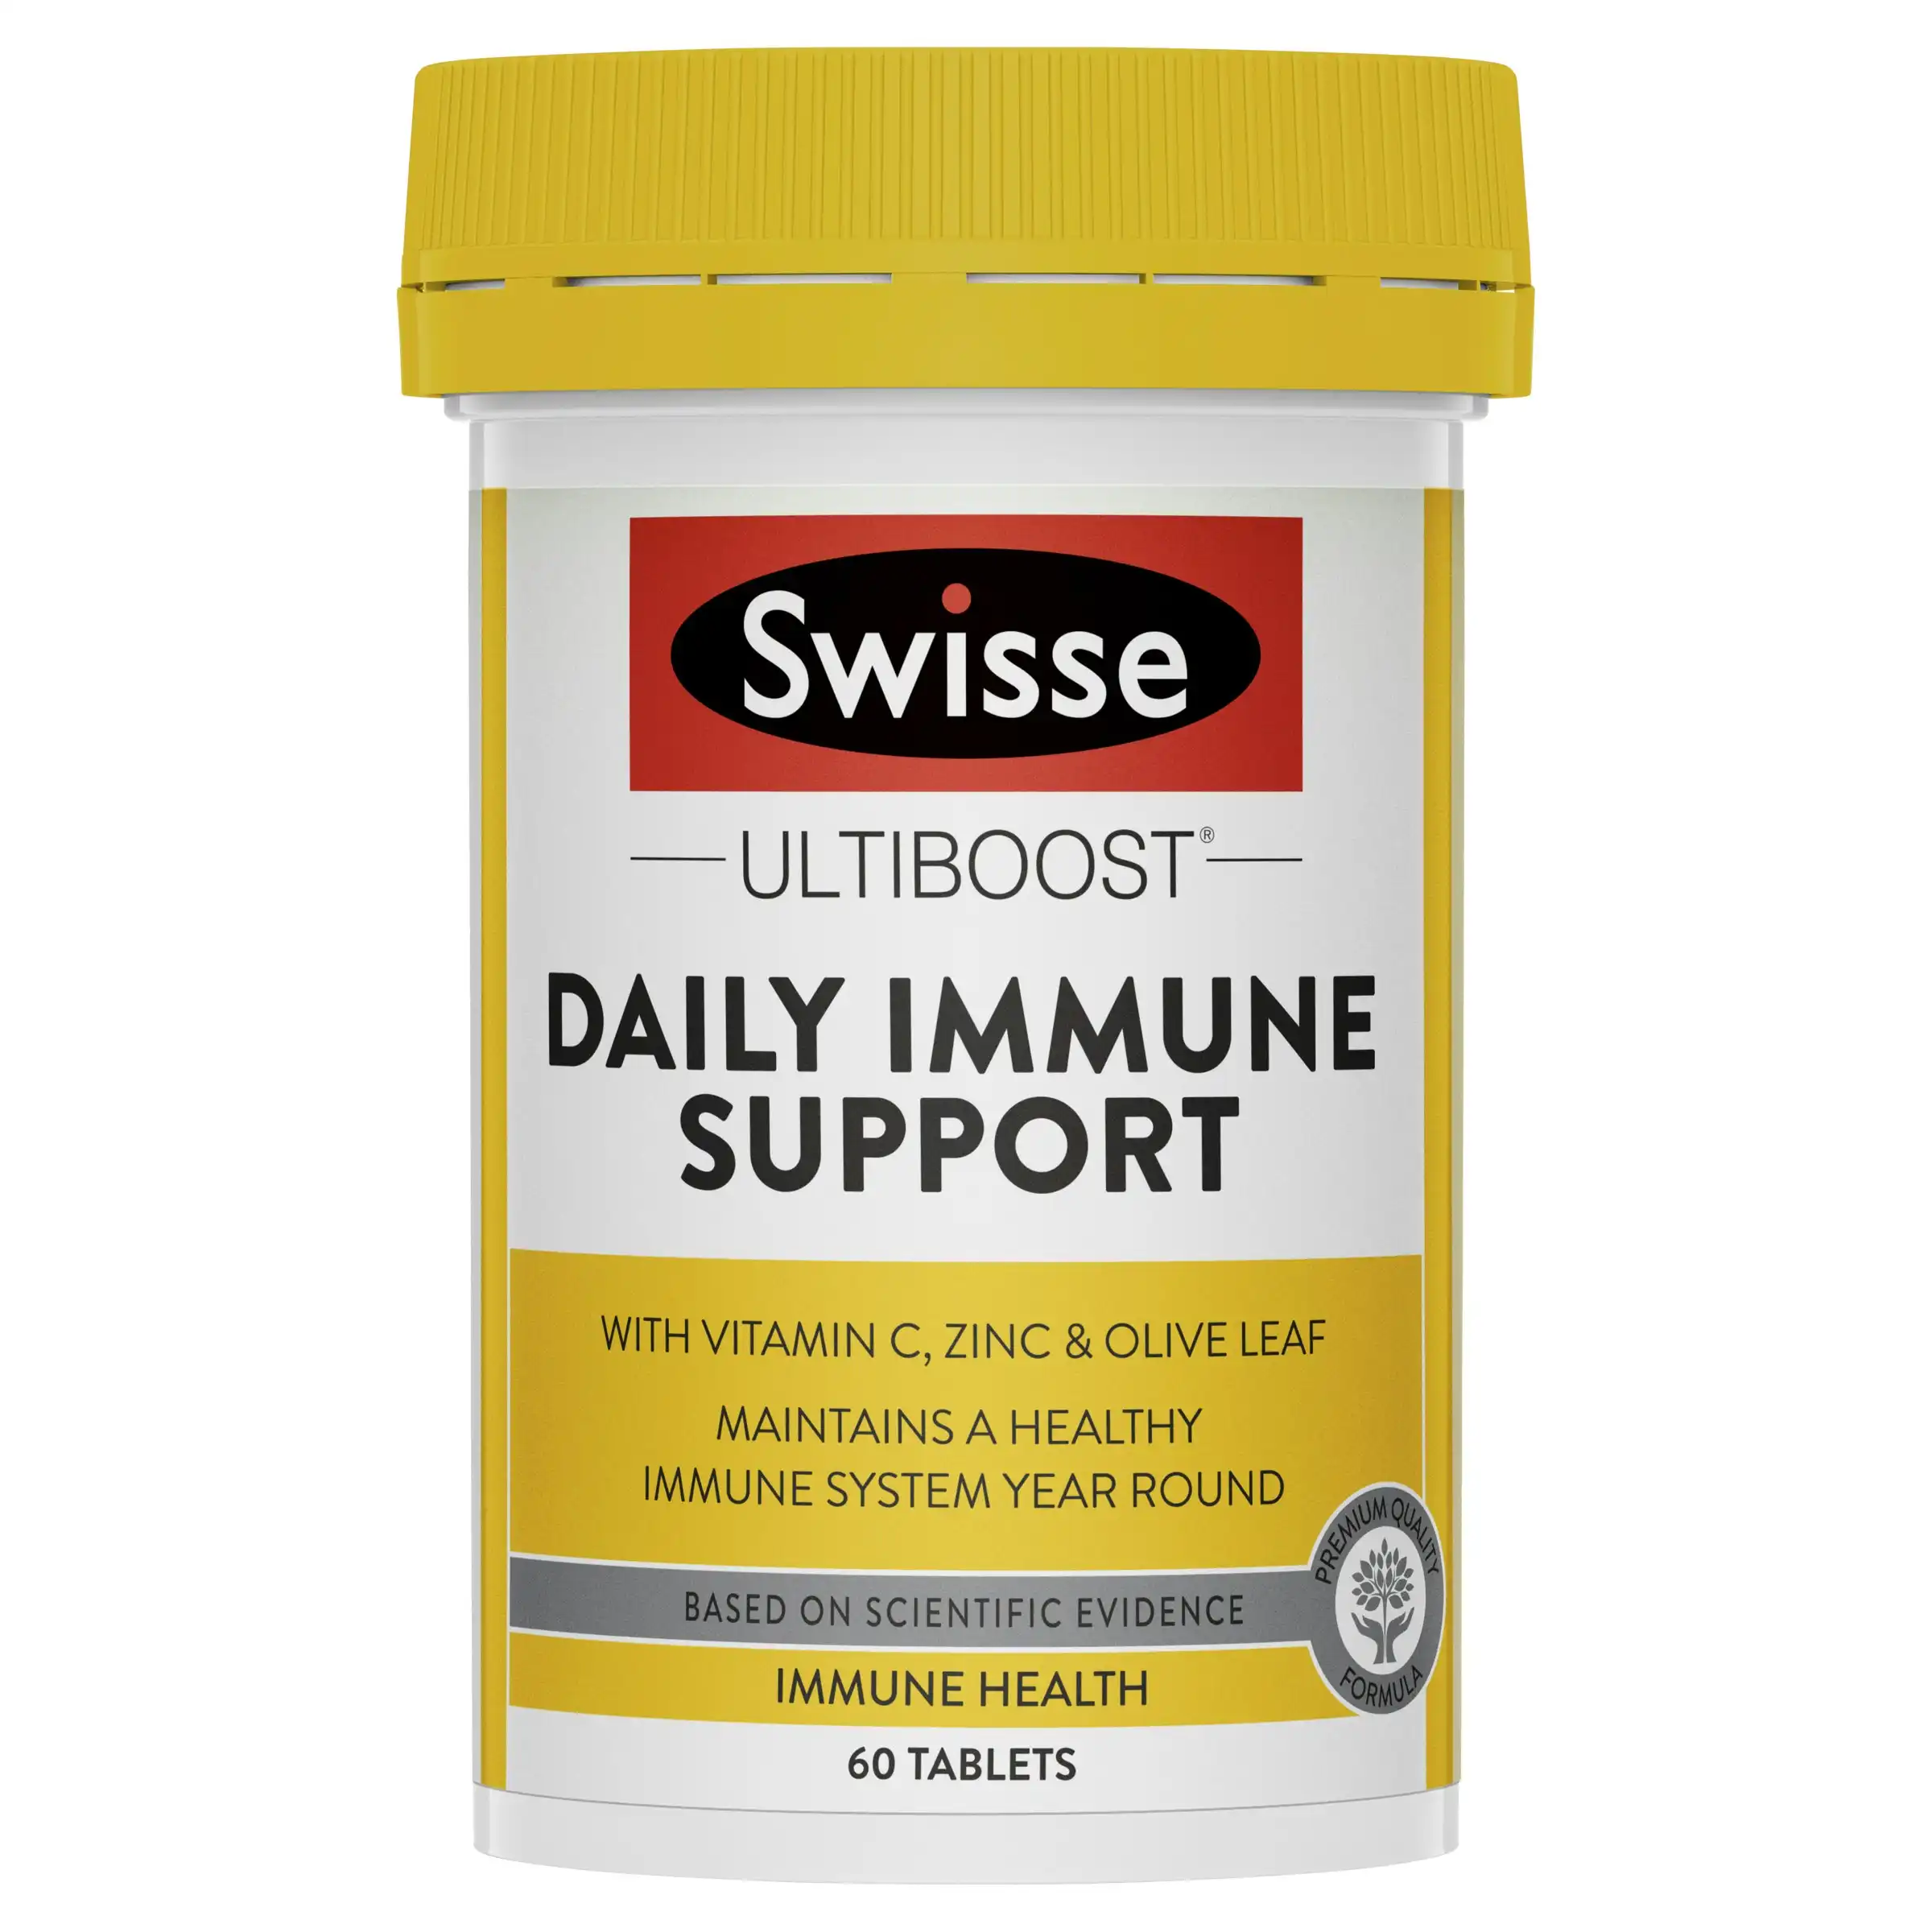 Swisse Ultiboost Daily Immune Support 60 Tab